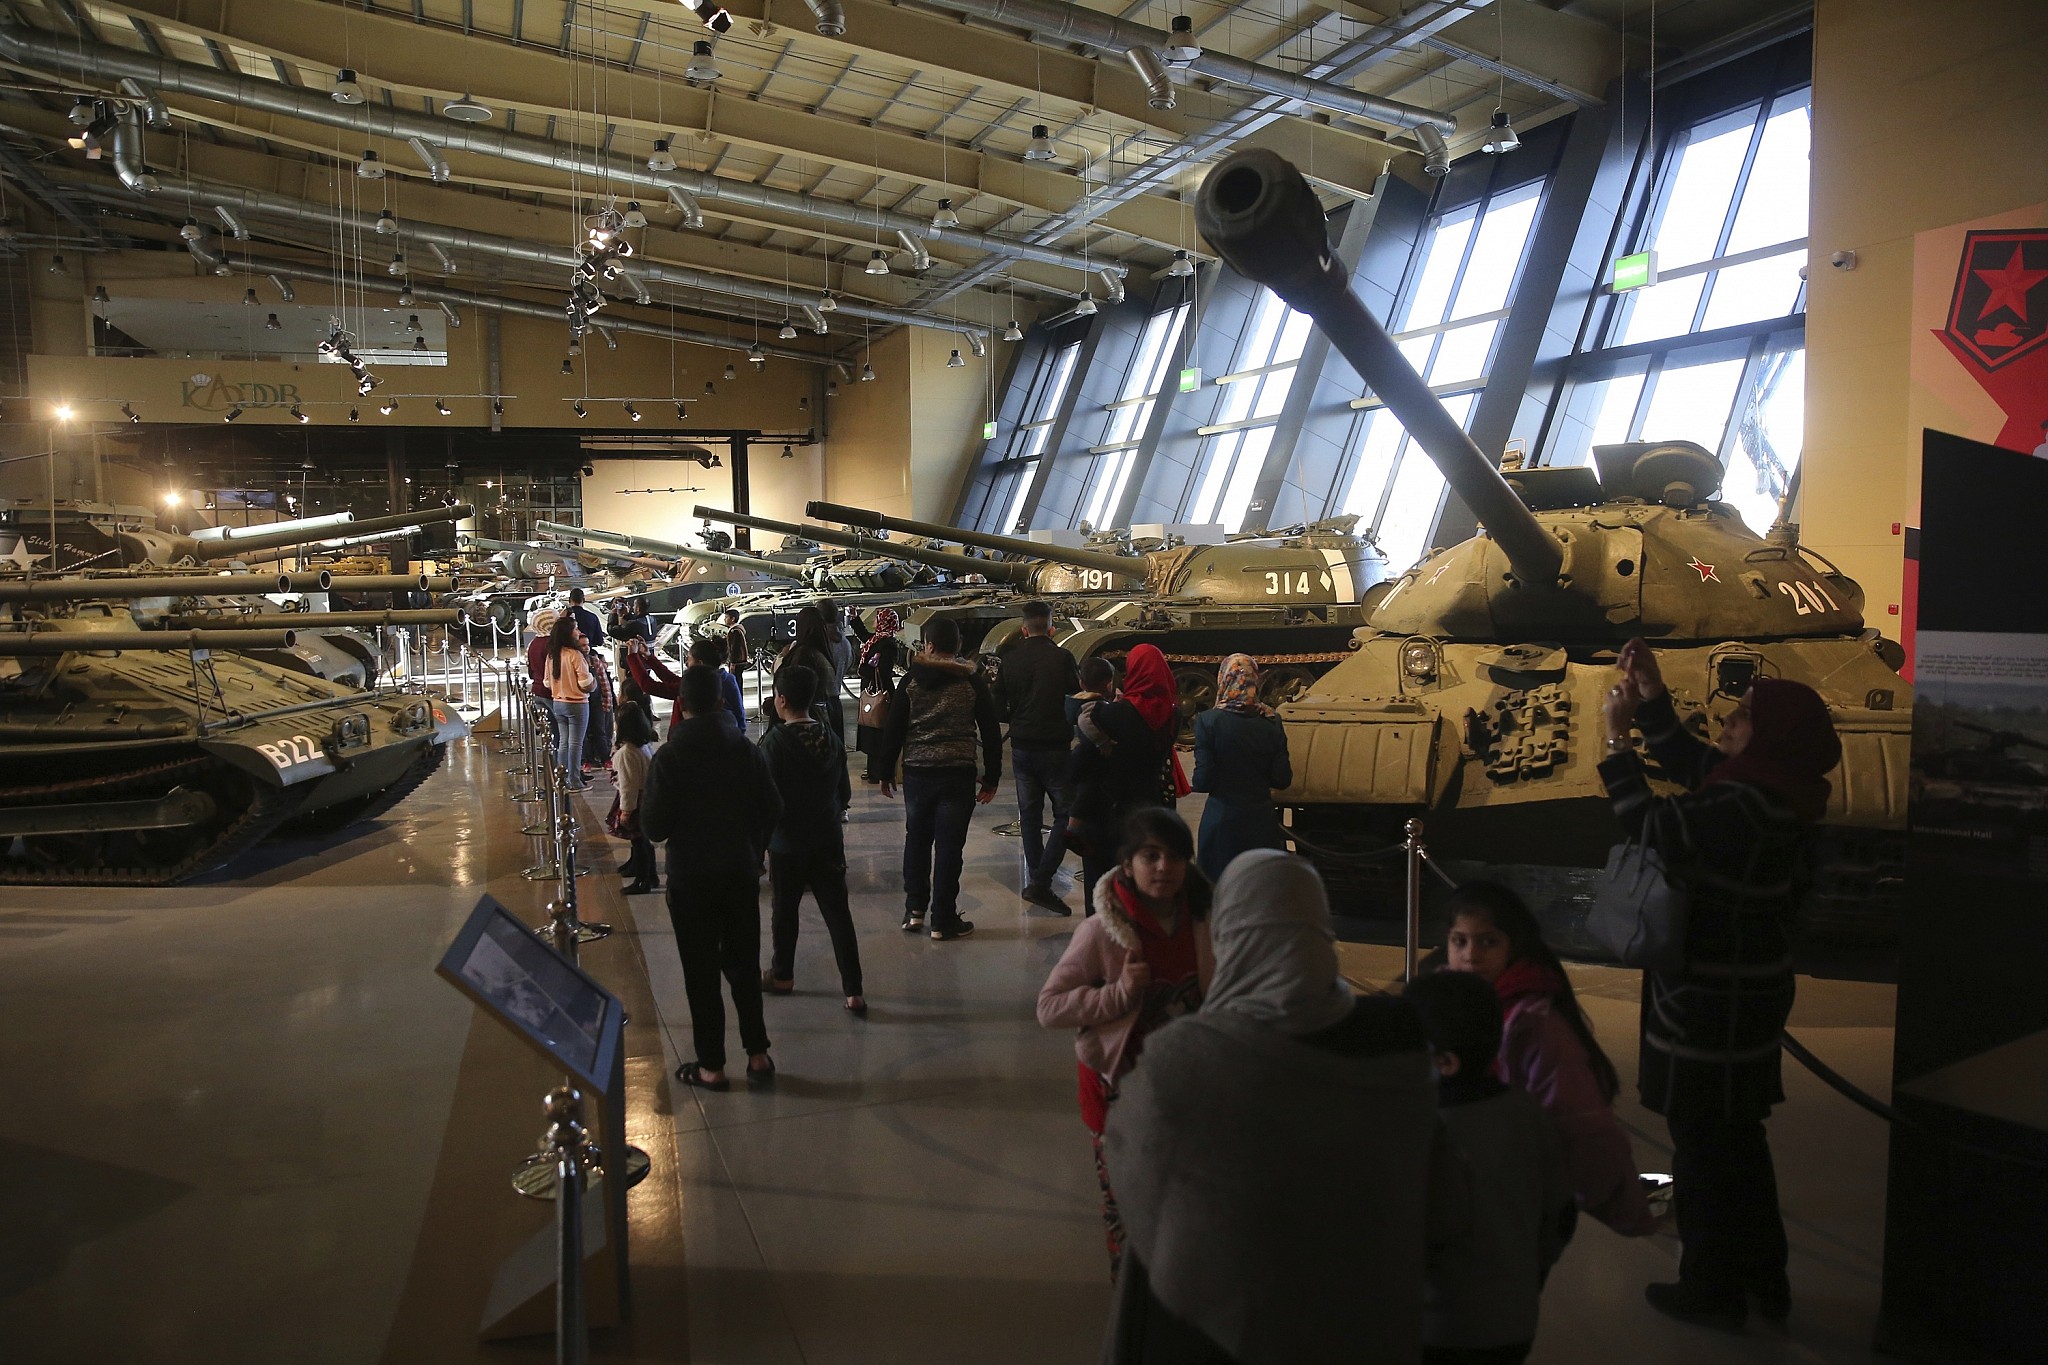 6 of the World's Best Tank Museums, Historical Landmarks